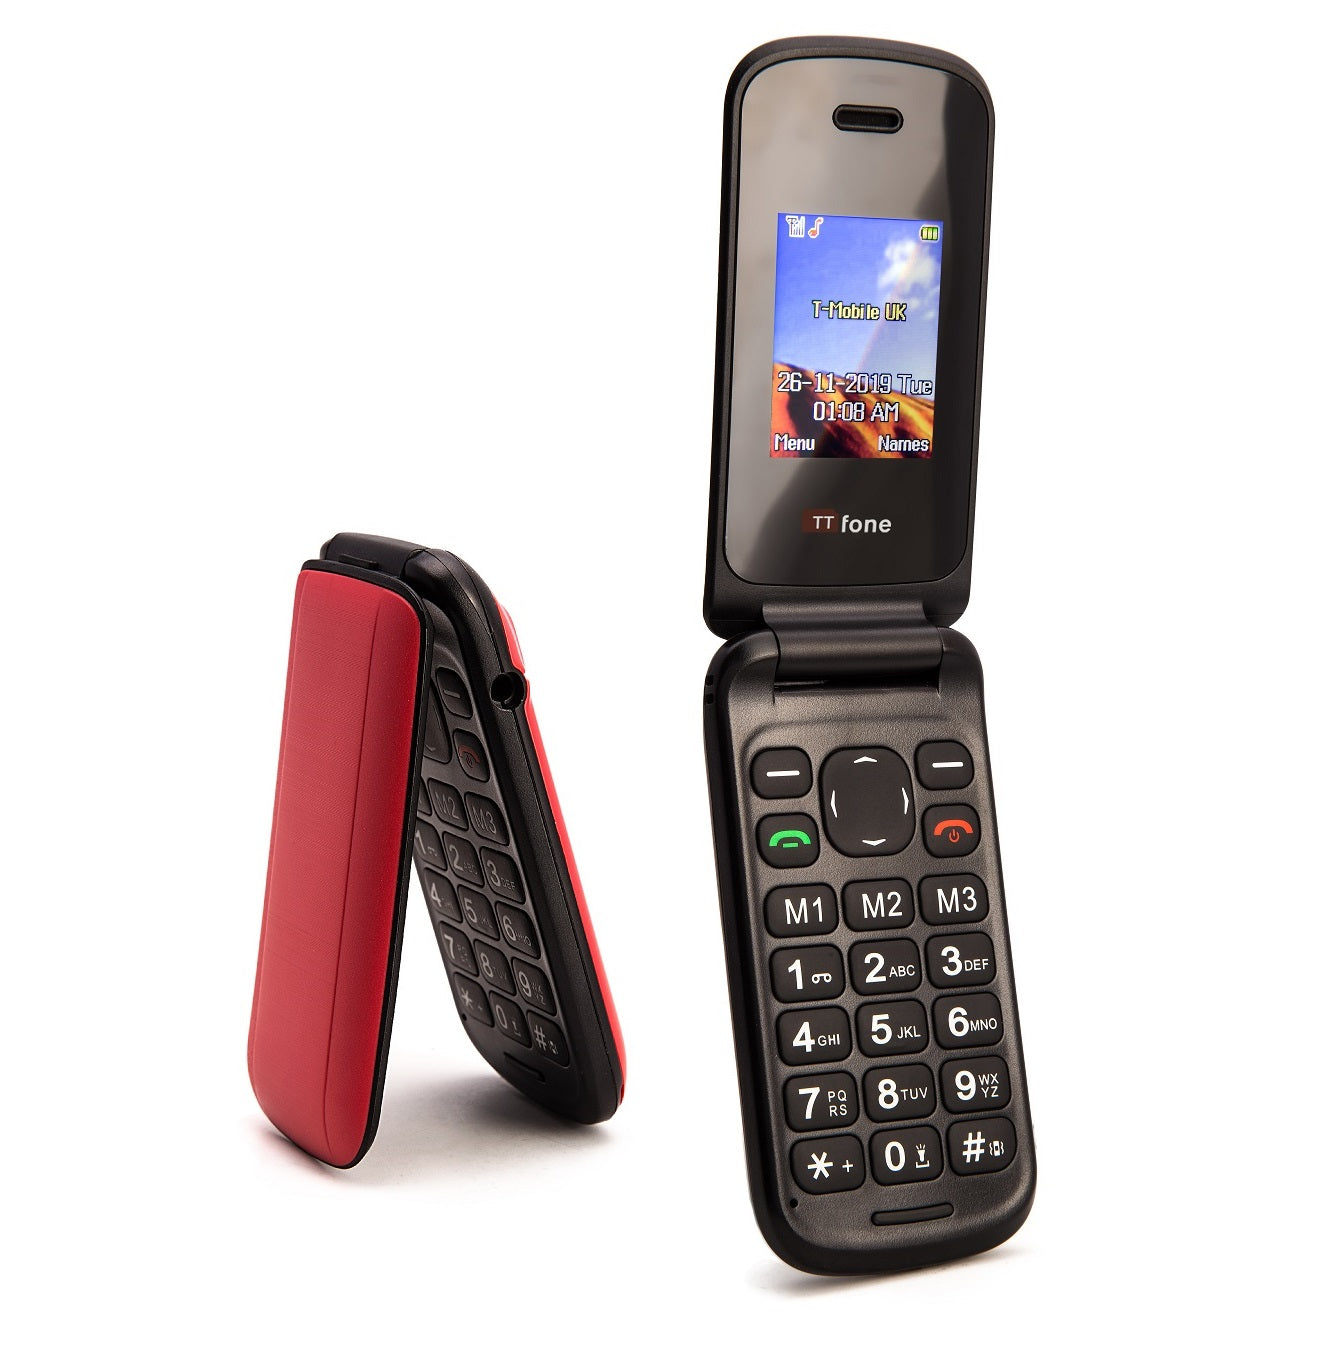 TTfone TT140 Red Flip Folding Phone with USB Cable, O2 pay as you go